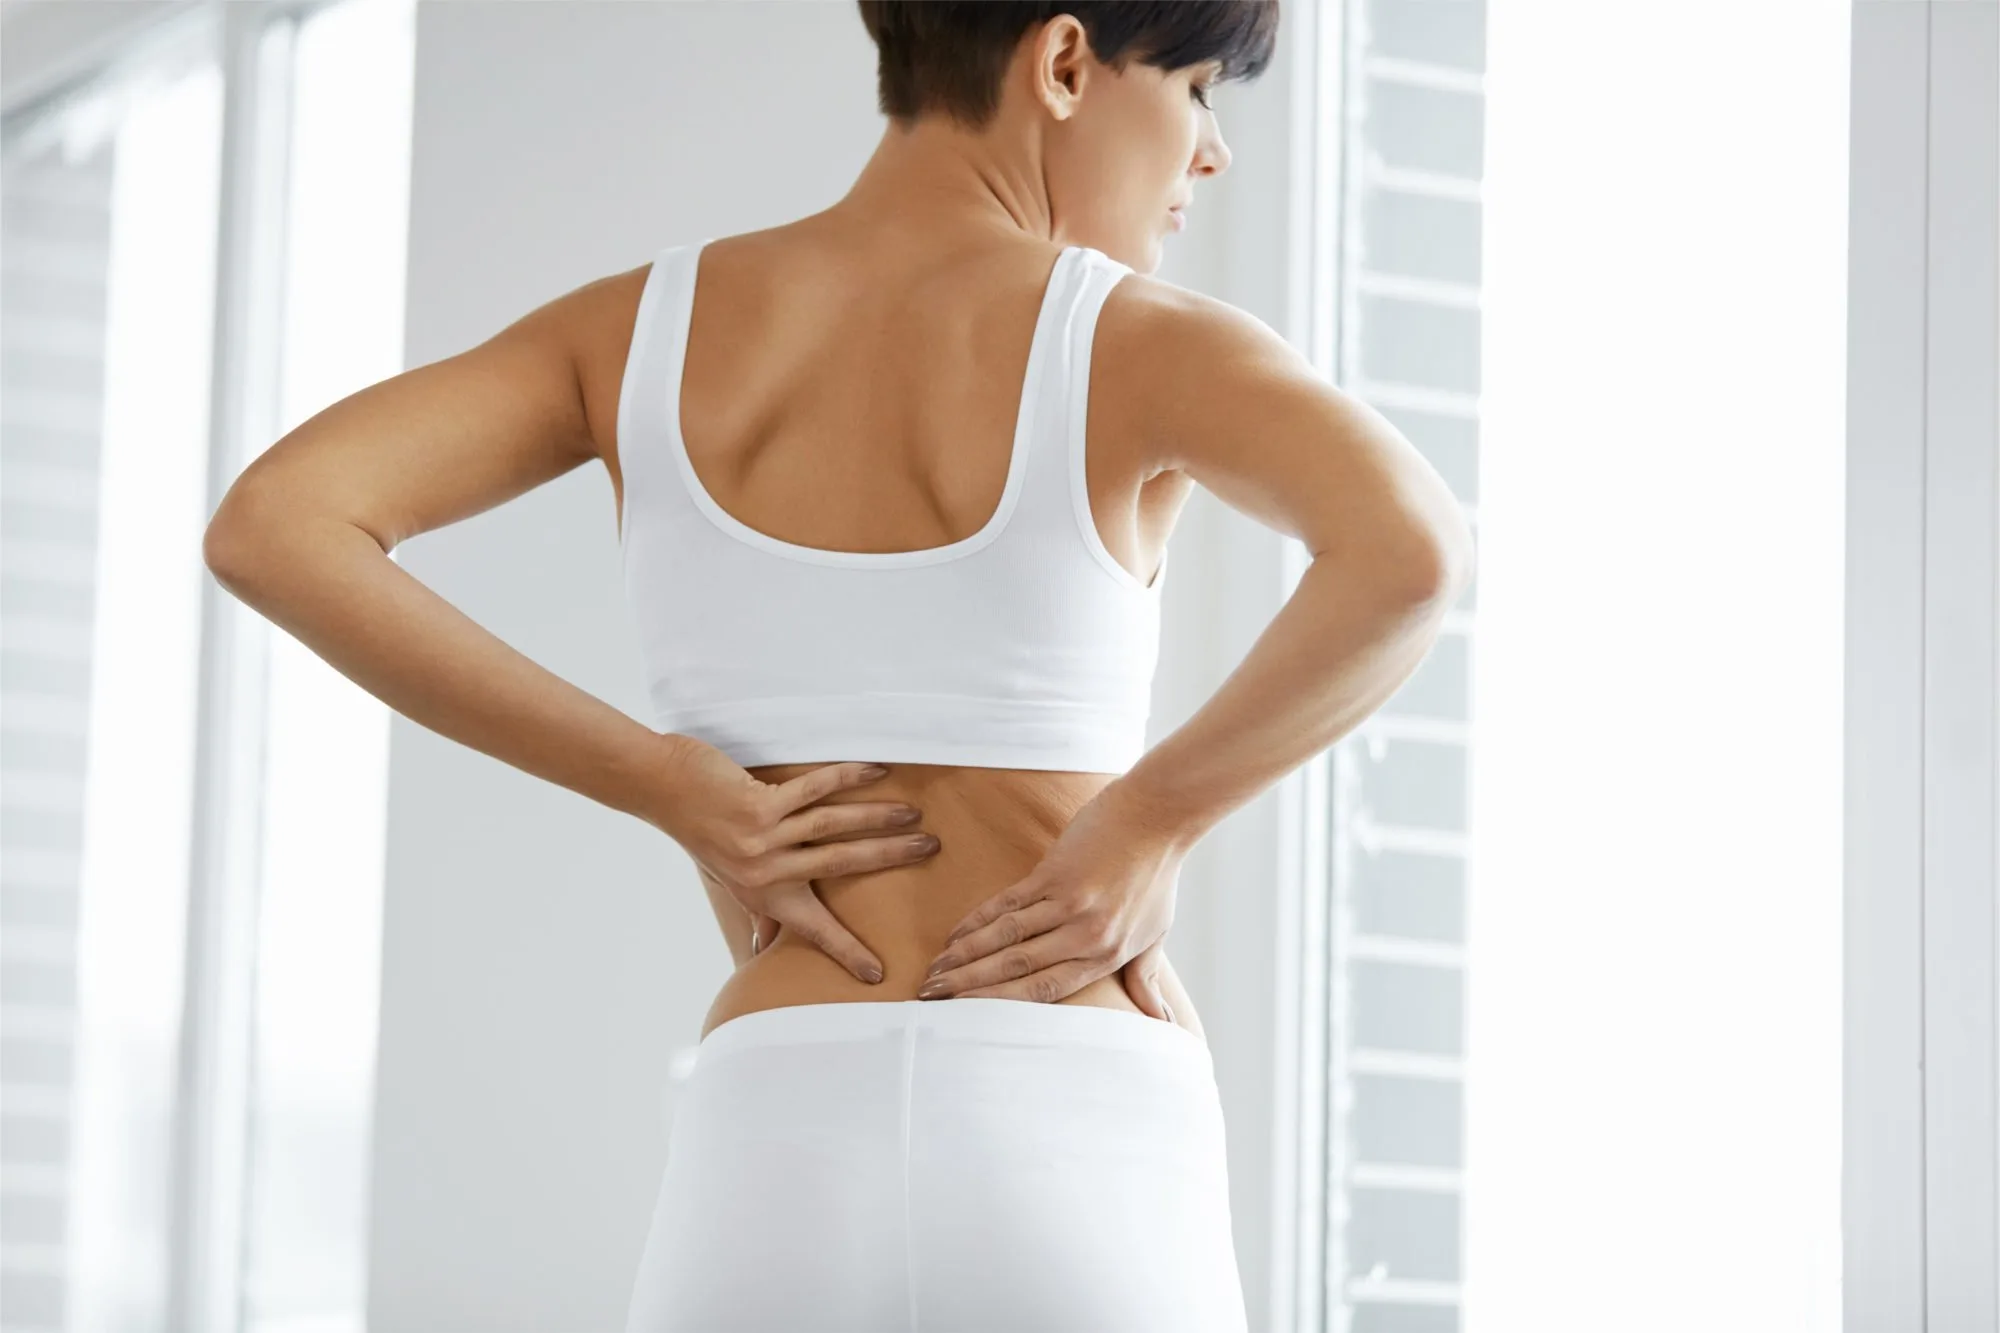 Tips to Reduce Lower Back Pain During Periods